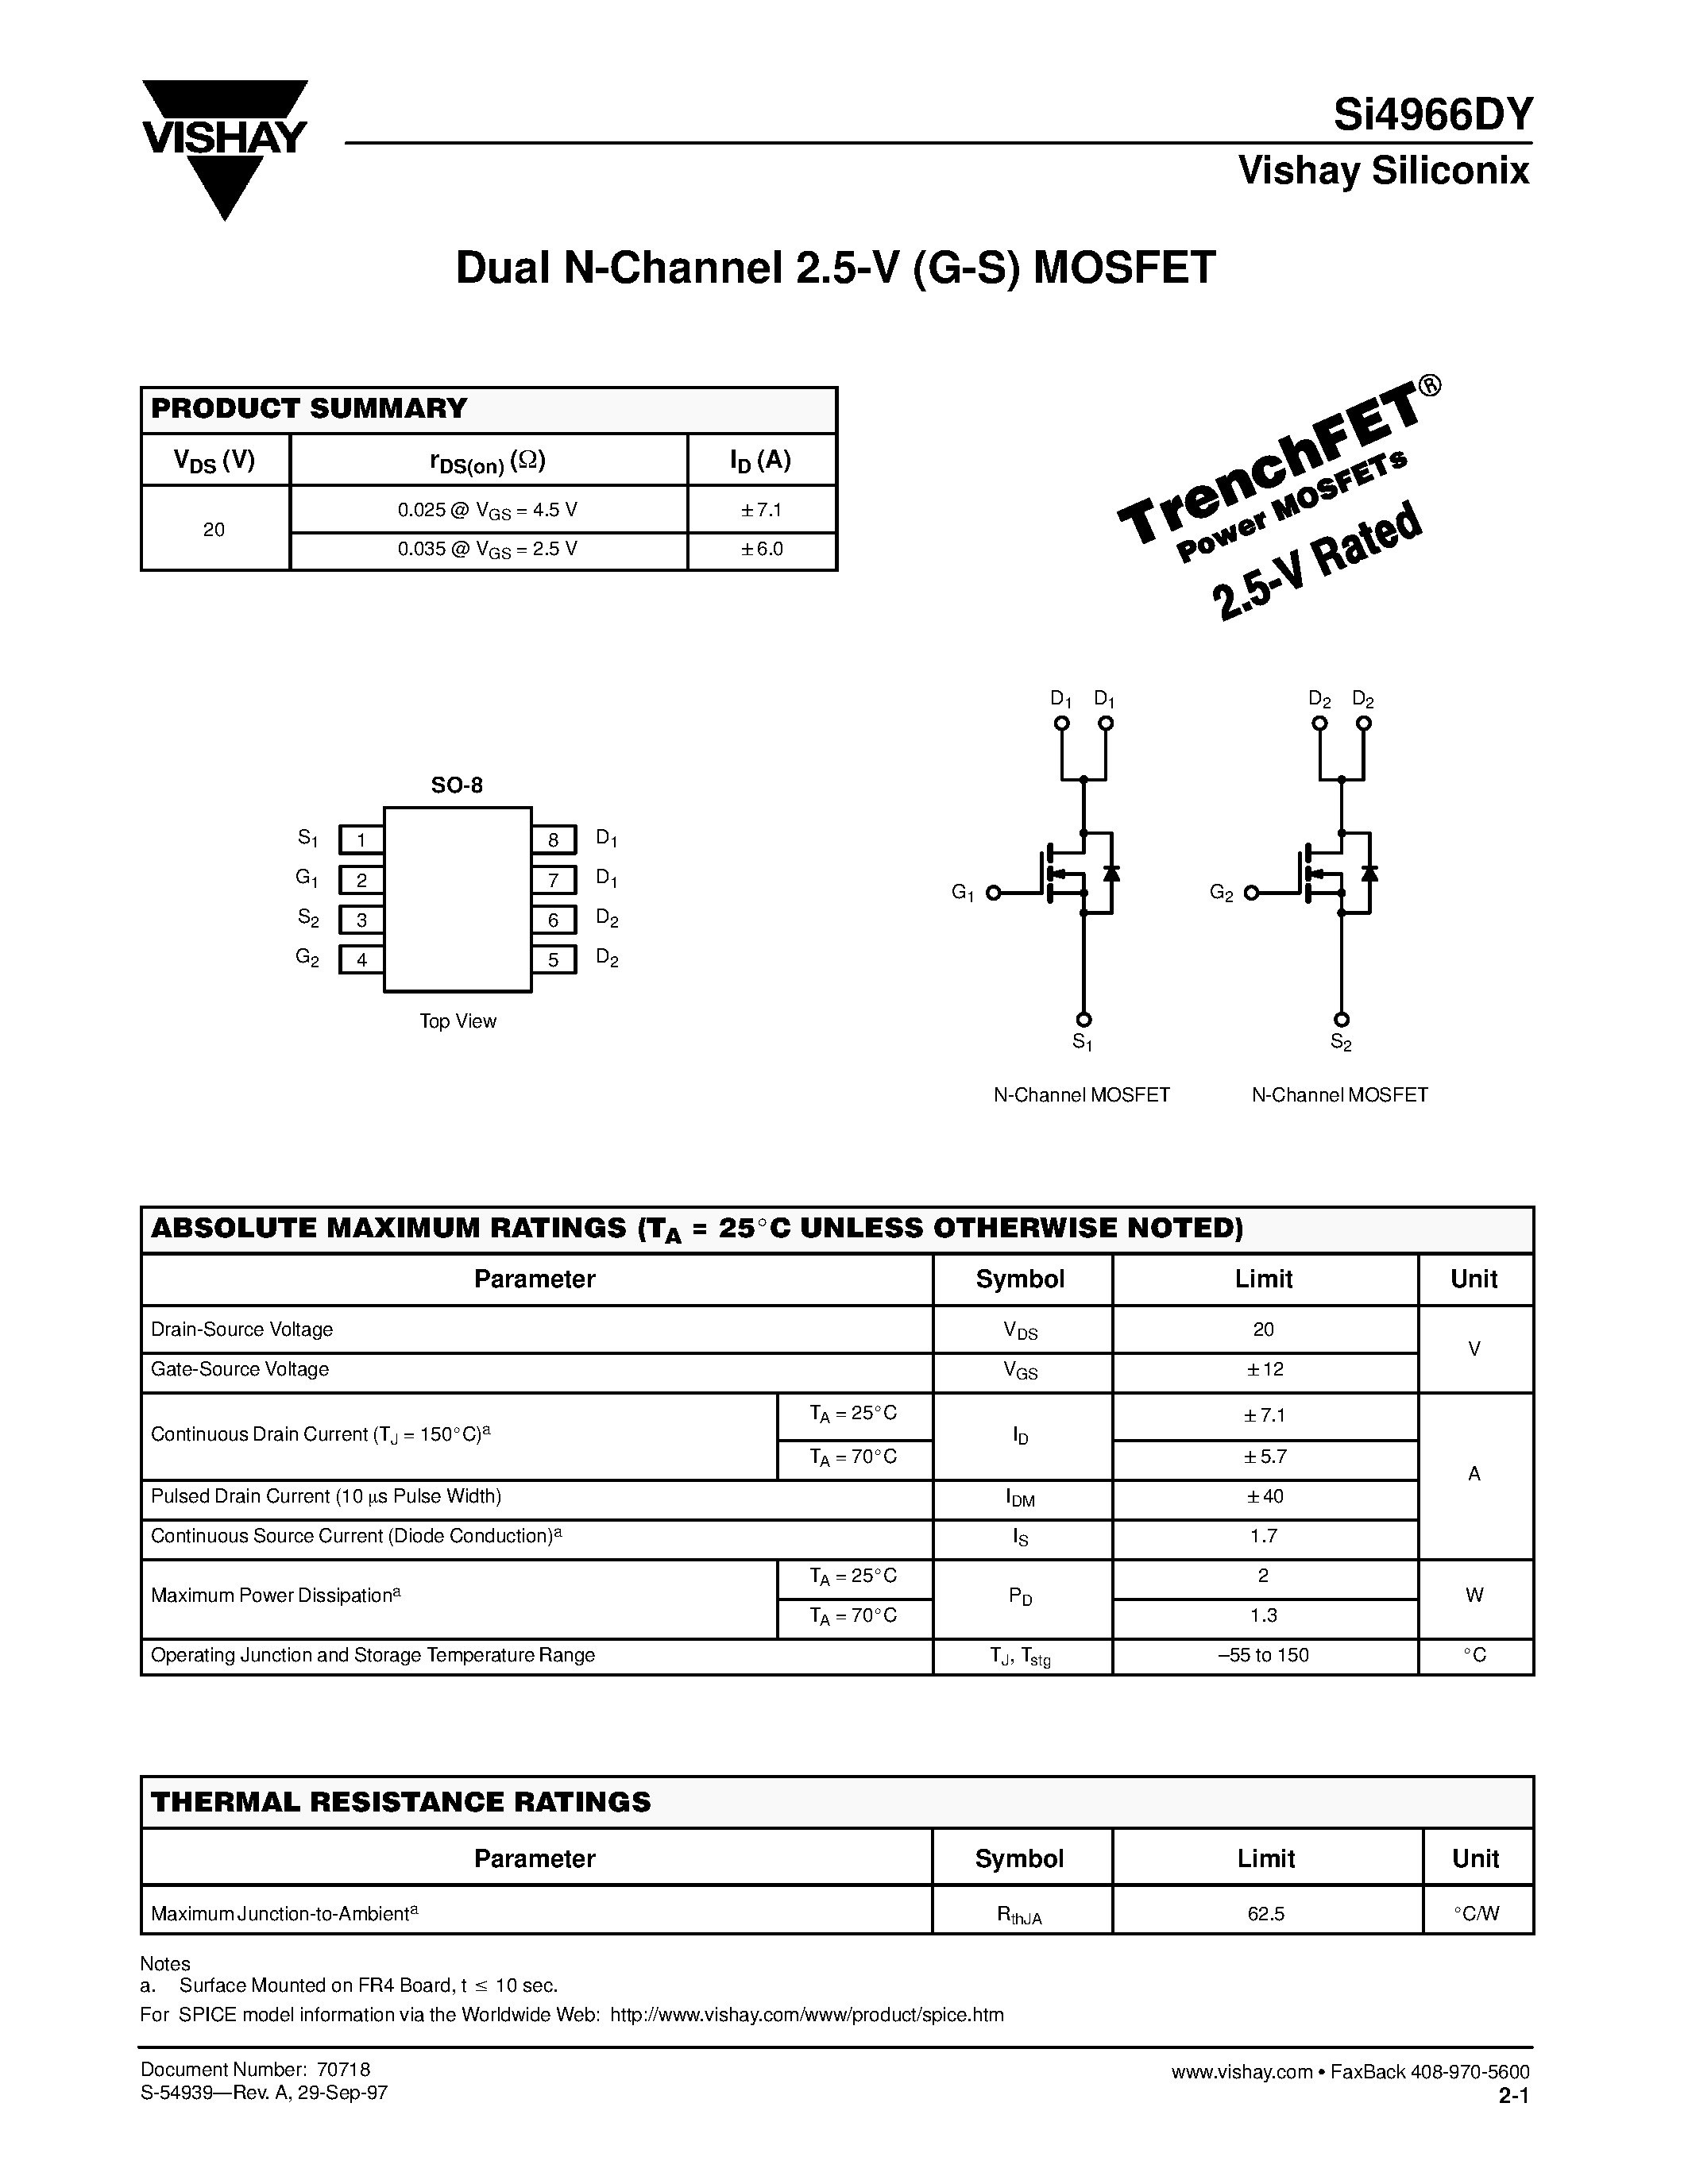 Даташит SI4966DY - Dual N-Channel 2.5-V (G-S) MOSFET страница 1